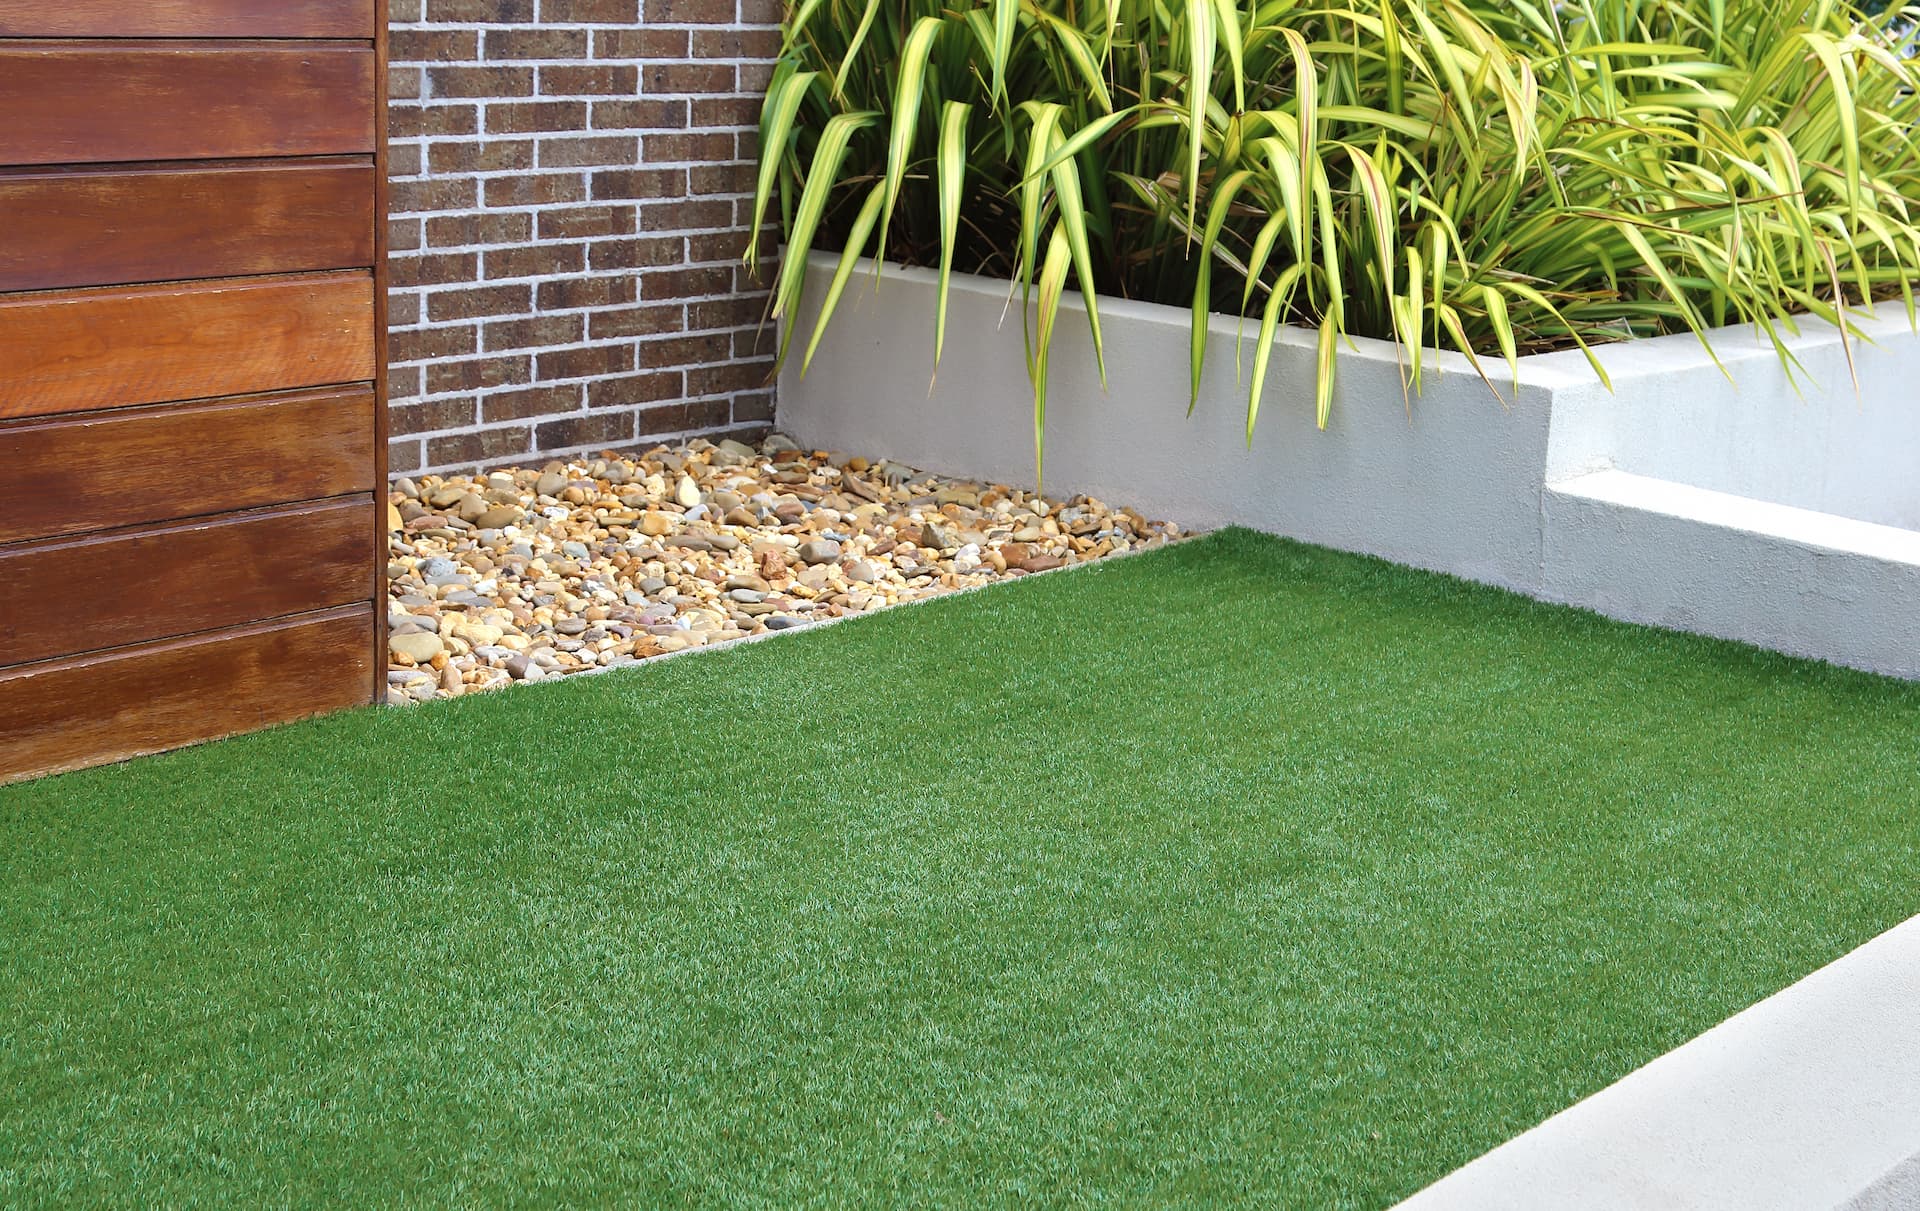 Licenced Artificial Grass & Turf services in Denton